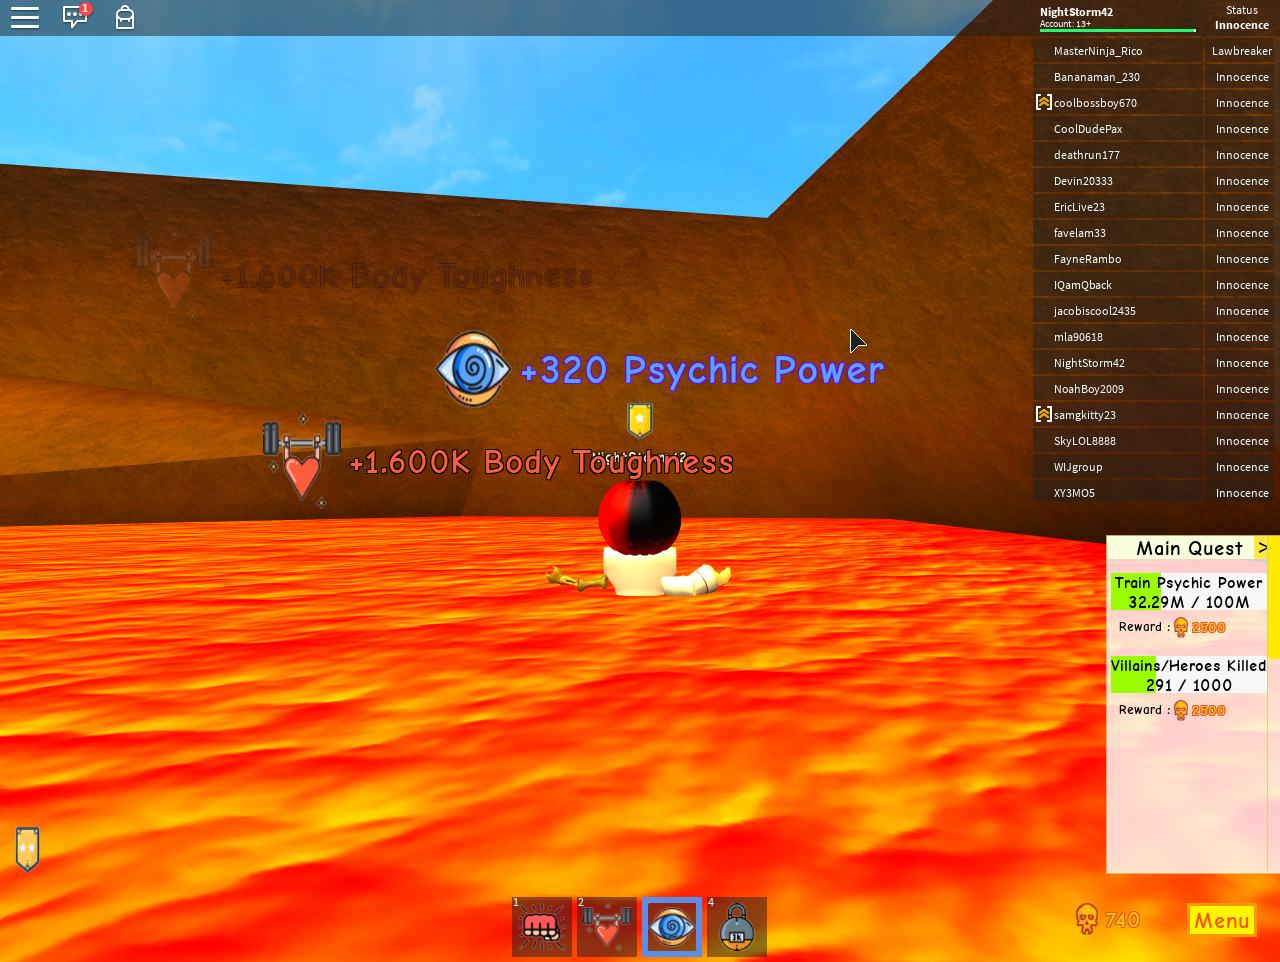 Body Toughness The Super Power Training Simulator Wiki Fandom - roblox super power training simulator psychic power 1